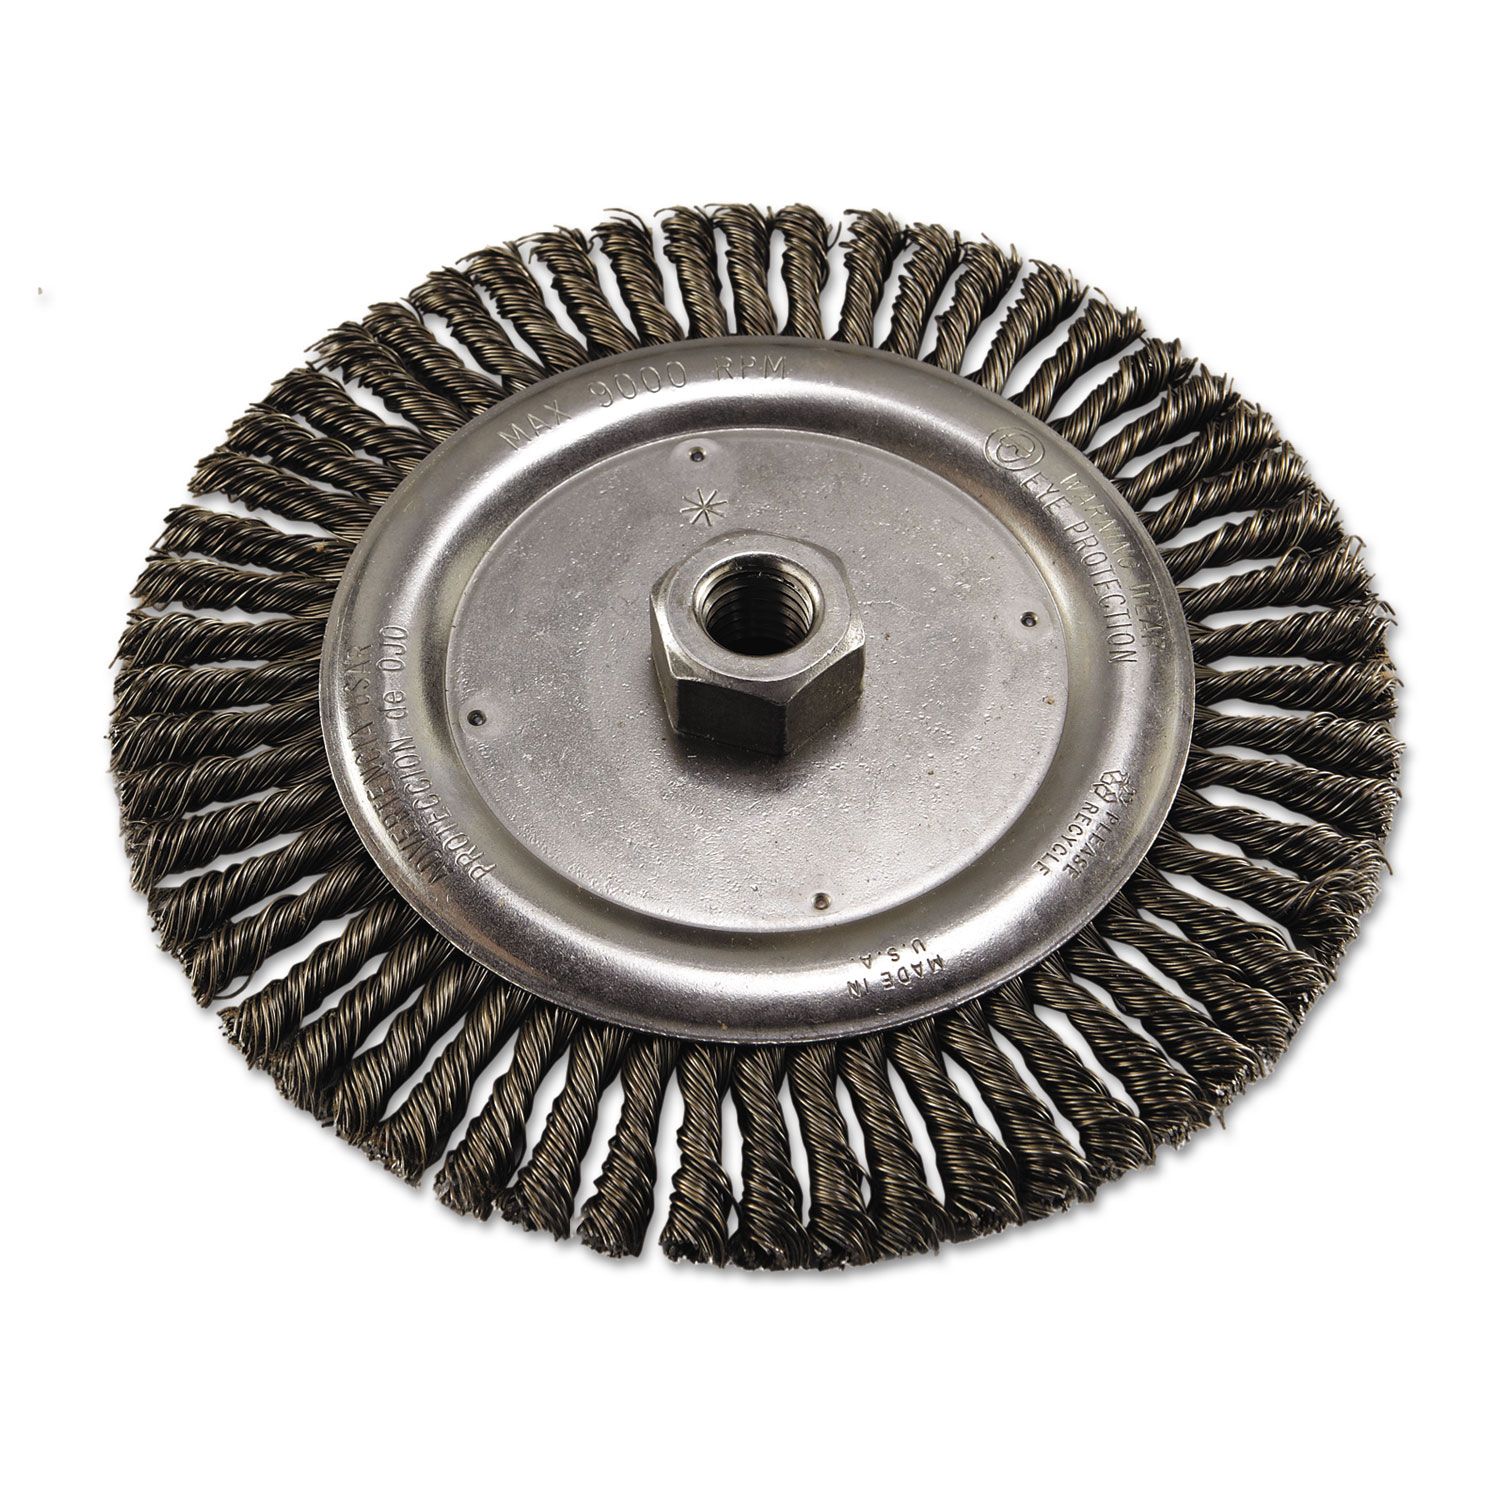  Anchor Brand 94870 String Bead Wheel Brush, 7 Dia, Steel, .02 Wire (ANR7S58) 